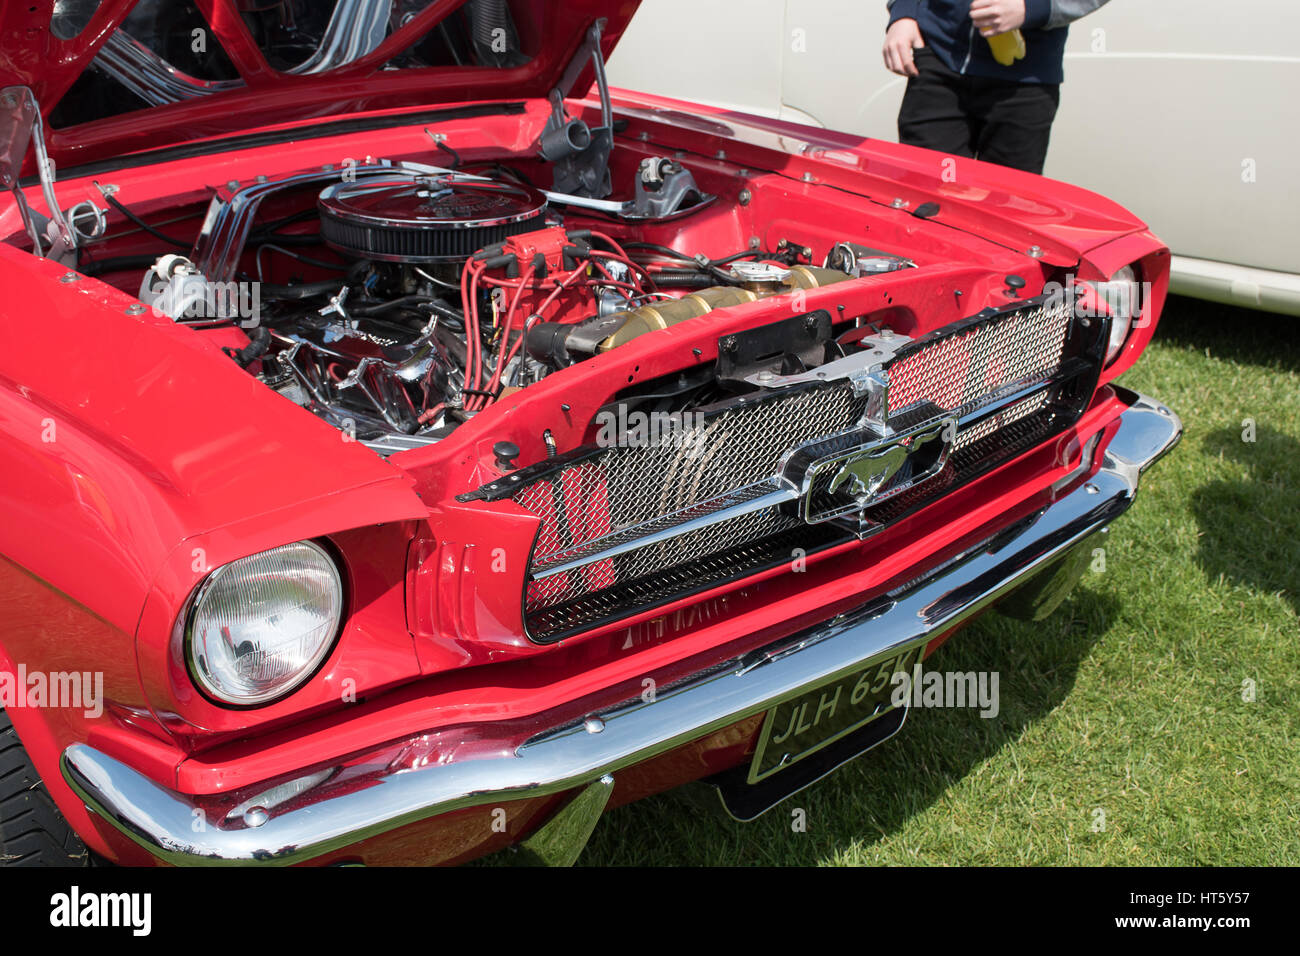 MANCHESTER, UNITED KINGDOM - JULY 11, 2015: 1971 Red Ford Mustang classic car engine. July 2015. Stock Photo